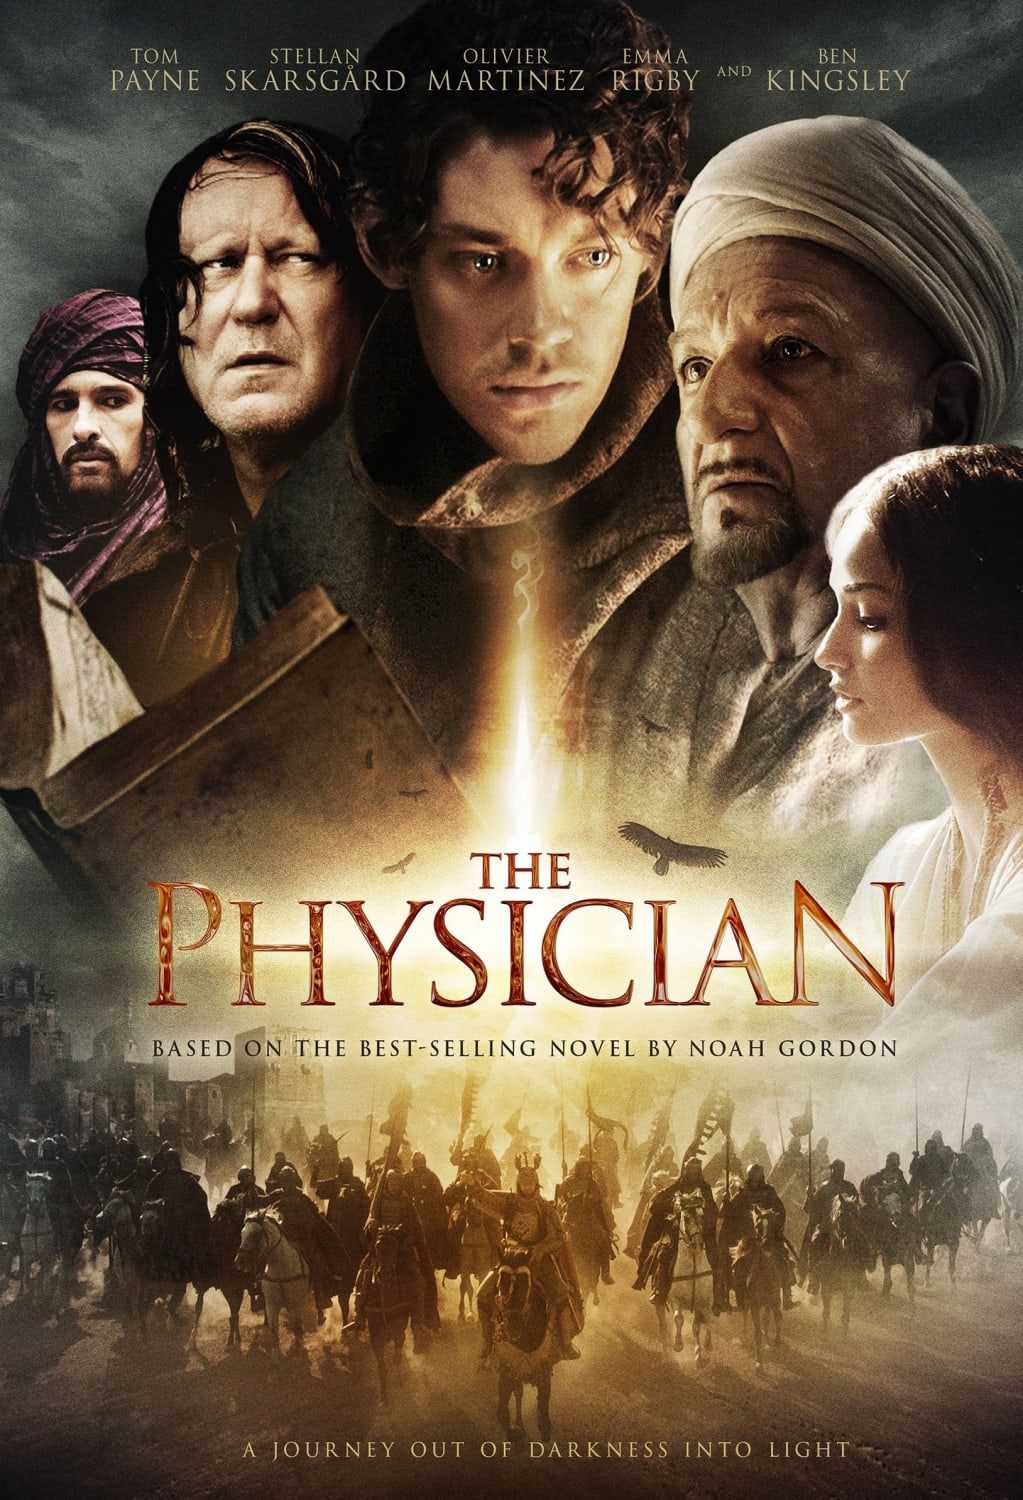 The Physician (DVD) on MovieShack